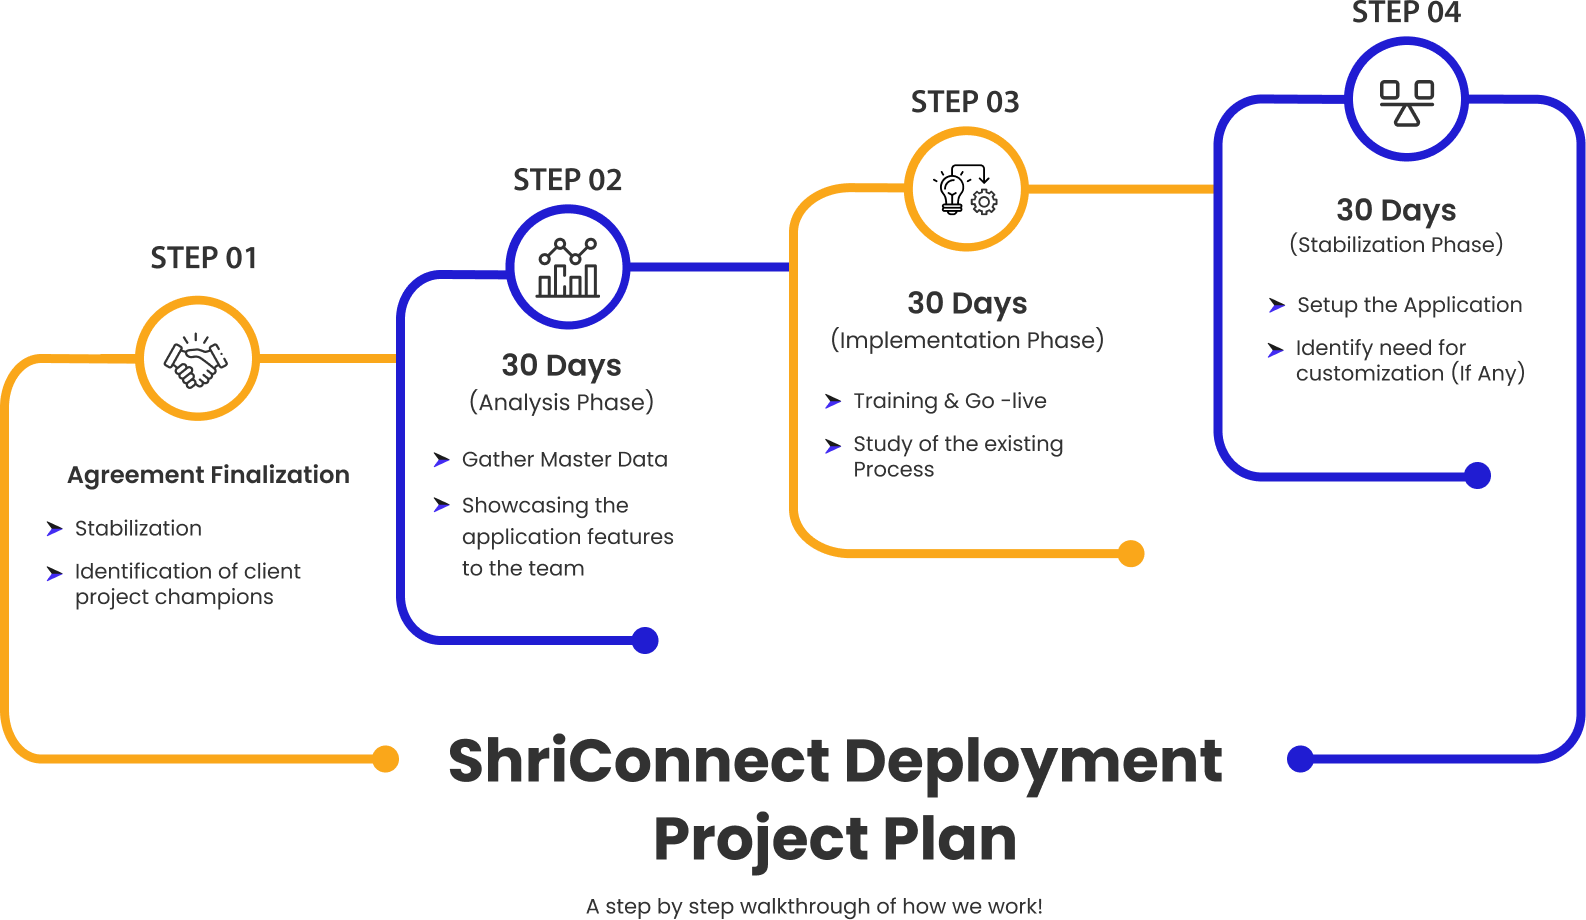 ShriConnect Deployment Project Plan